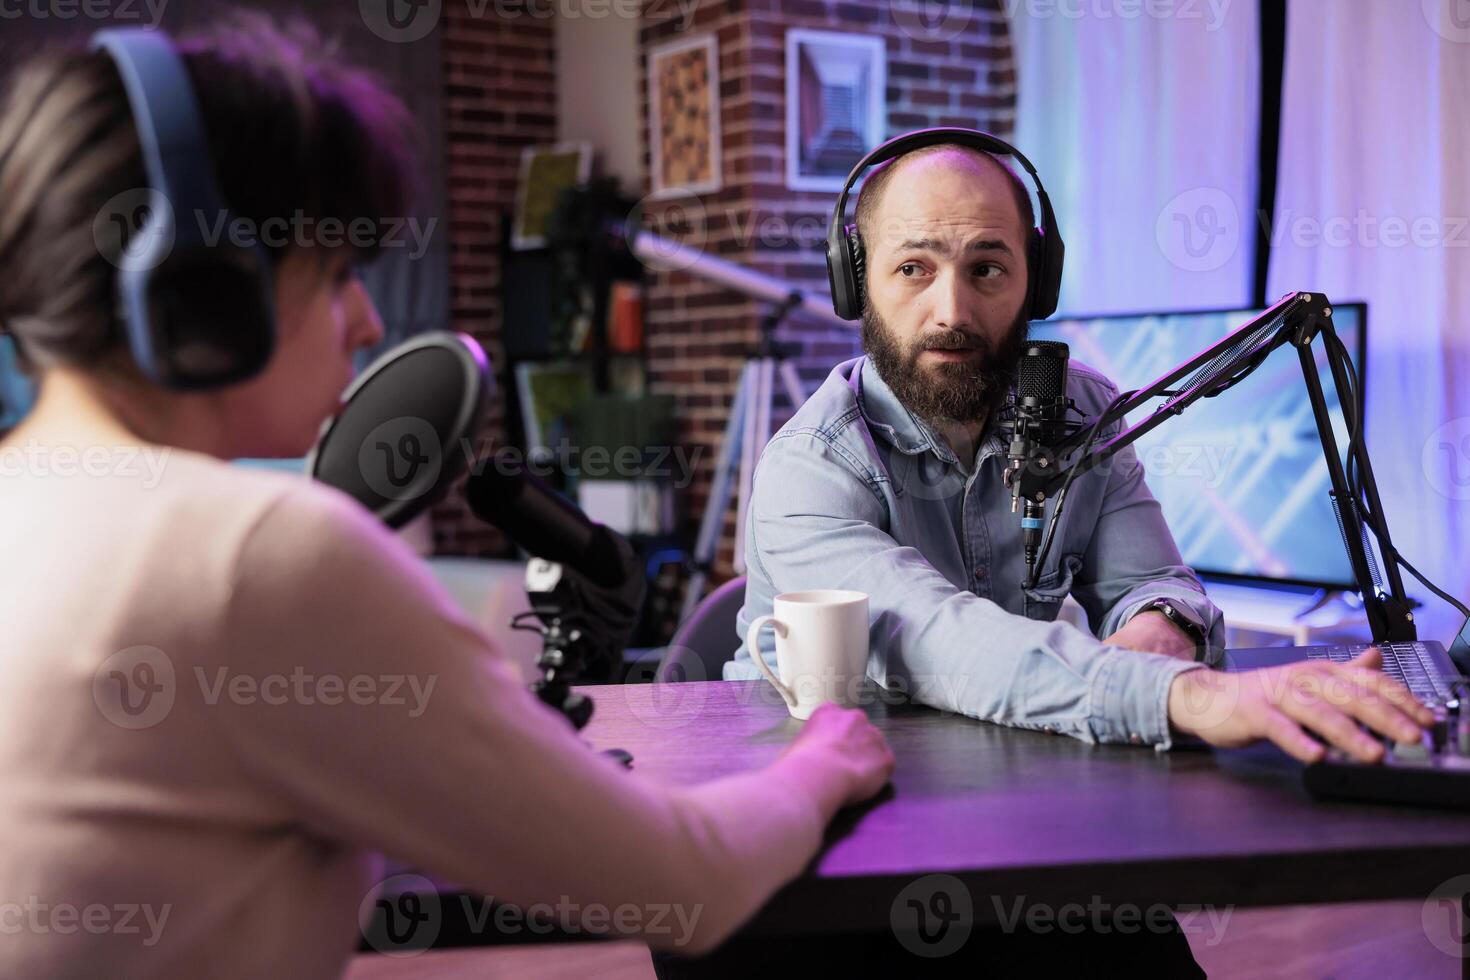 Show presenter interviewing designer during live stream, talking about fashion and style trends. Man having conversation with social media influencer, recording episode for podcast photo